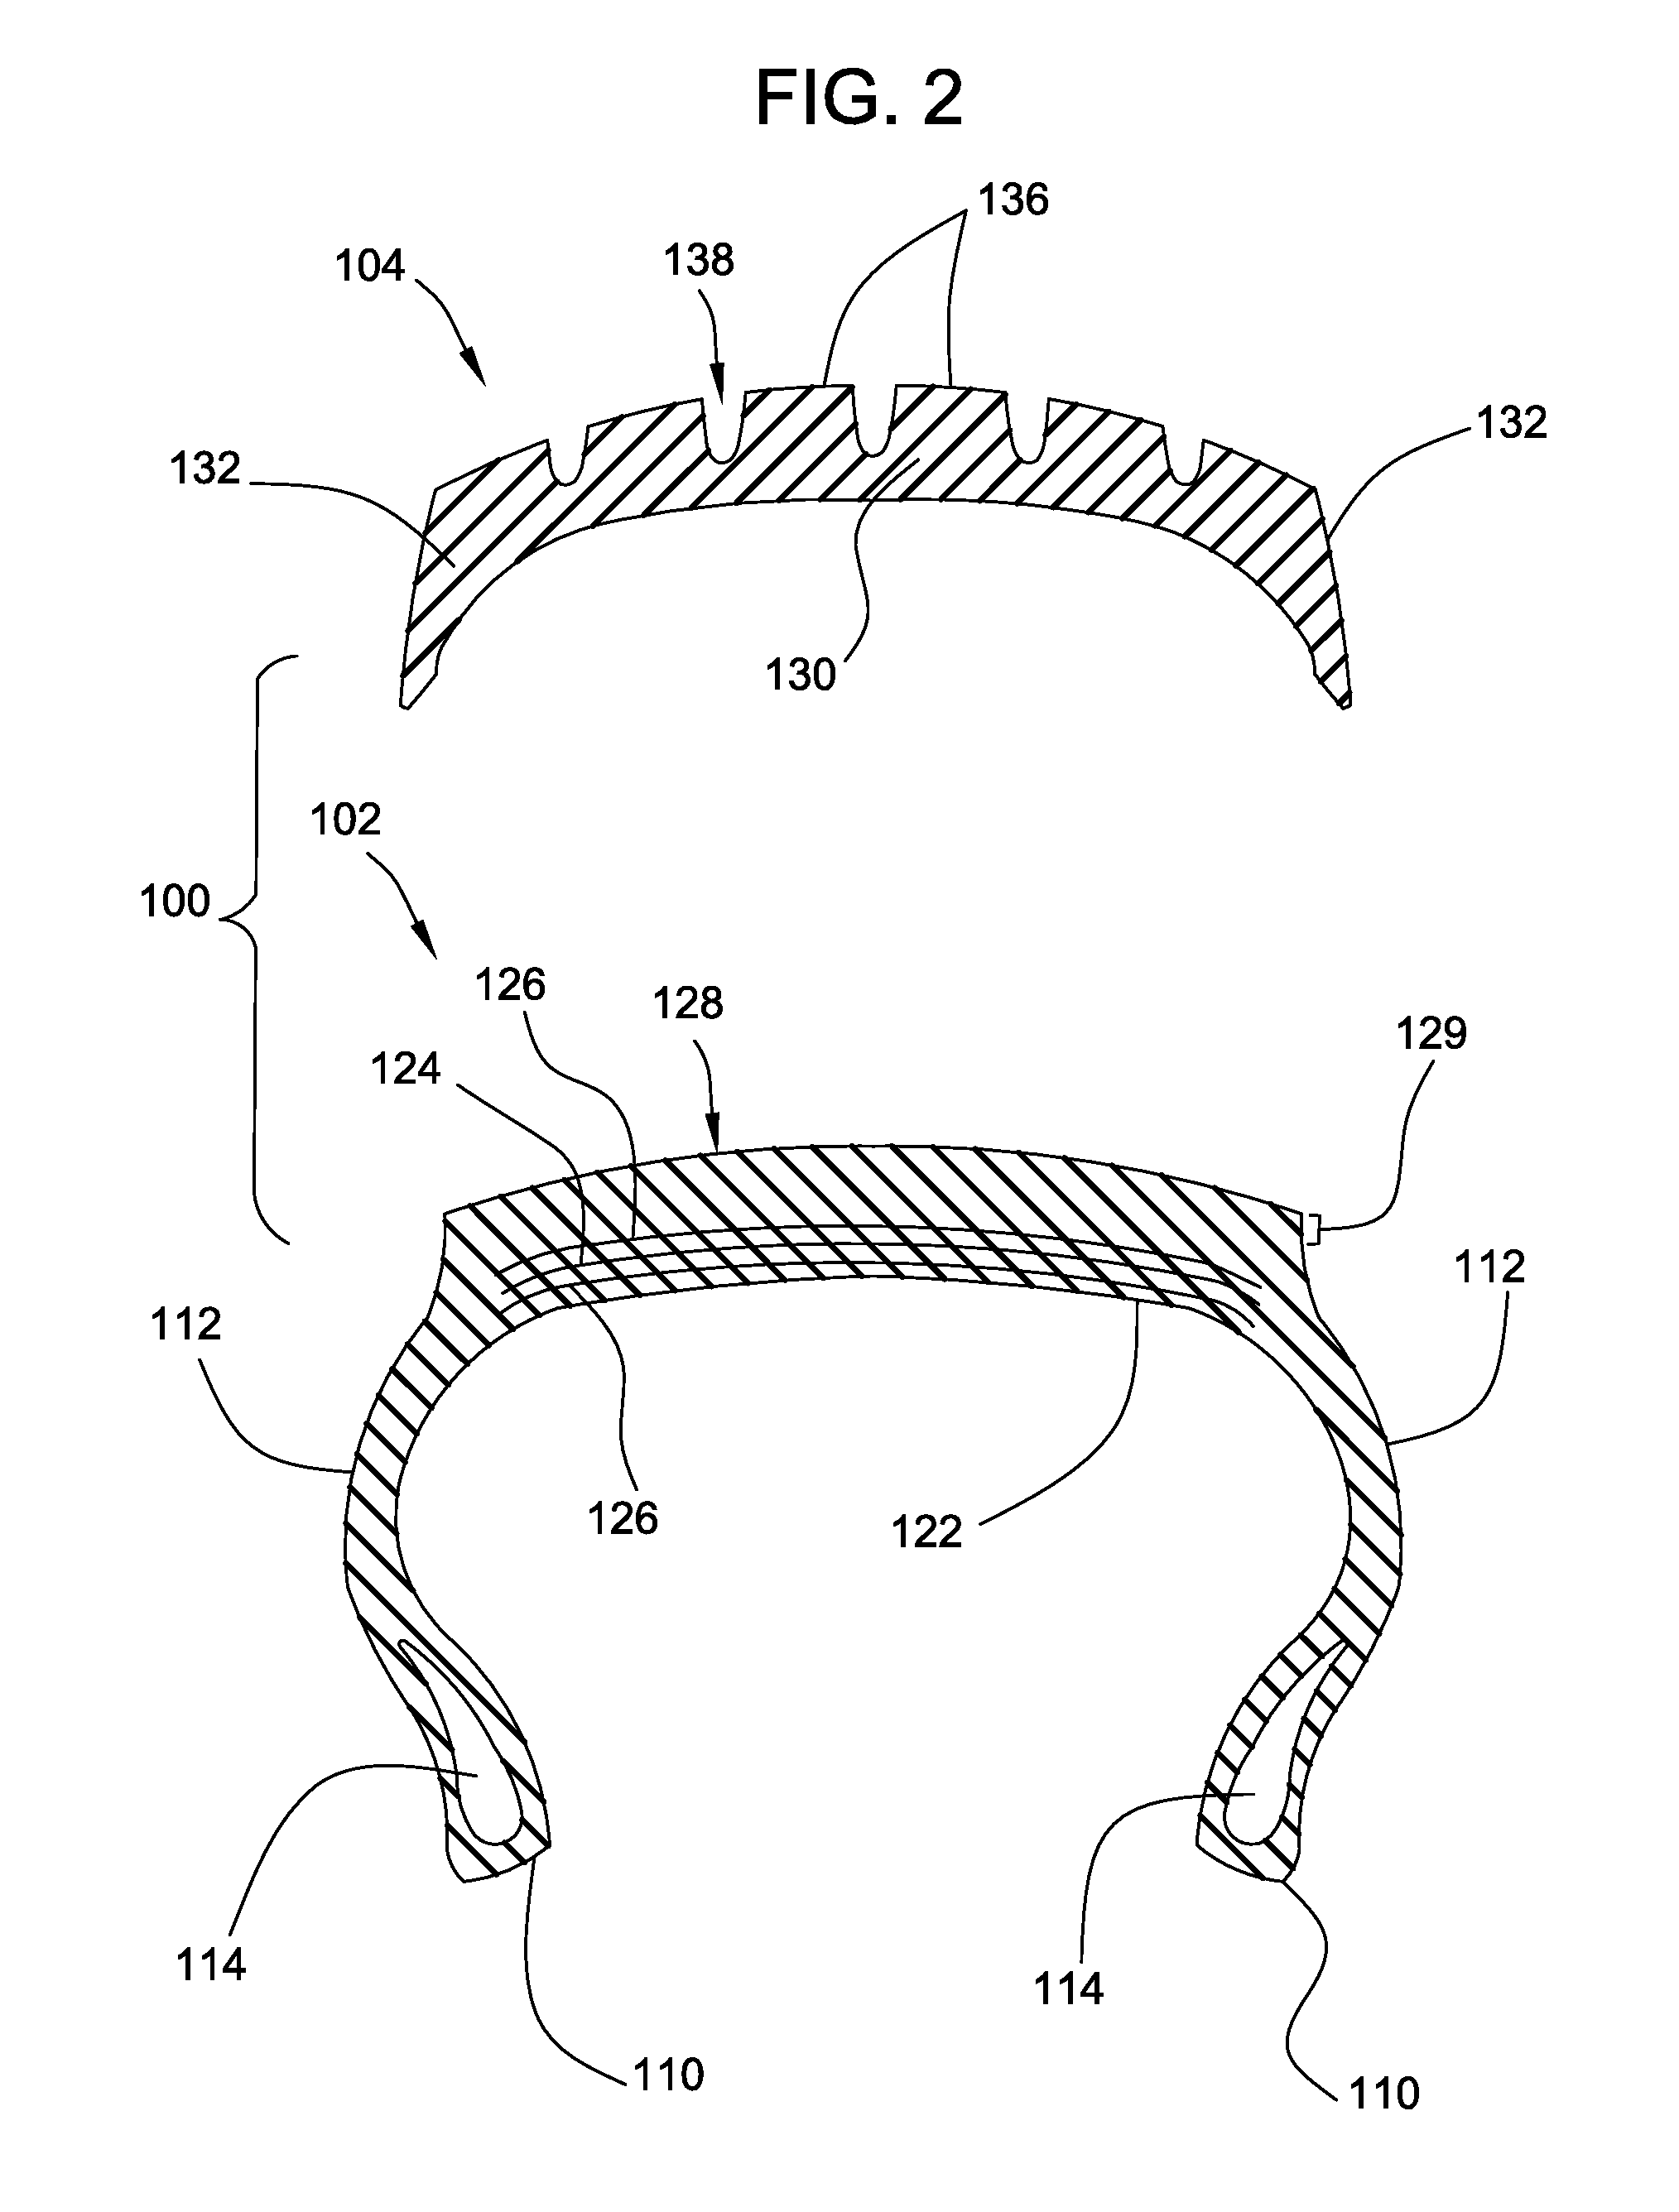 System and method for pricing, leasing, and transferring ownership of tires